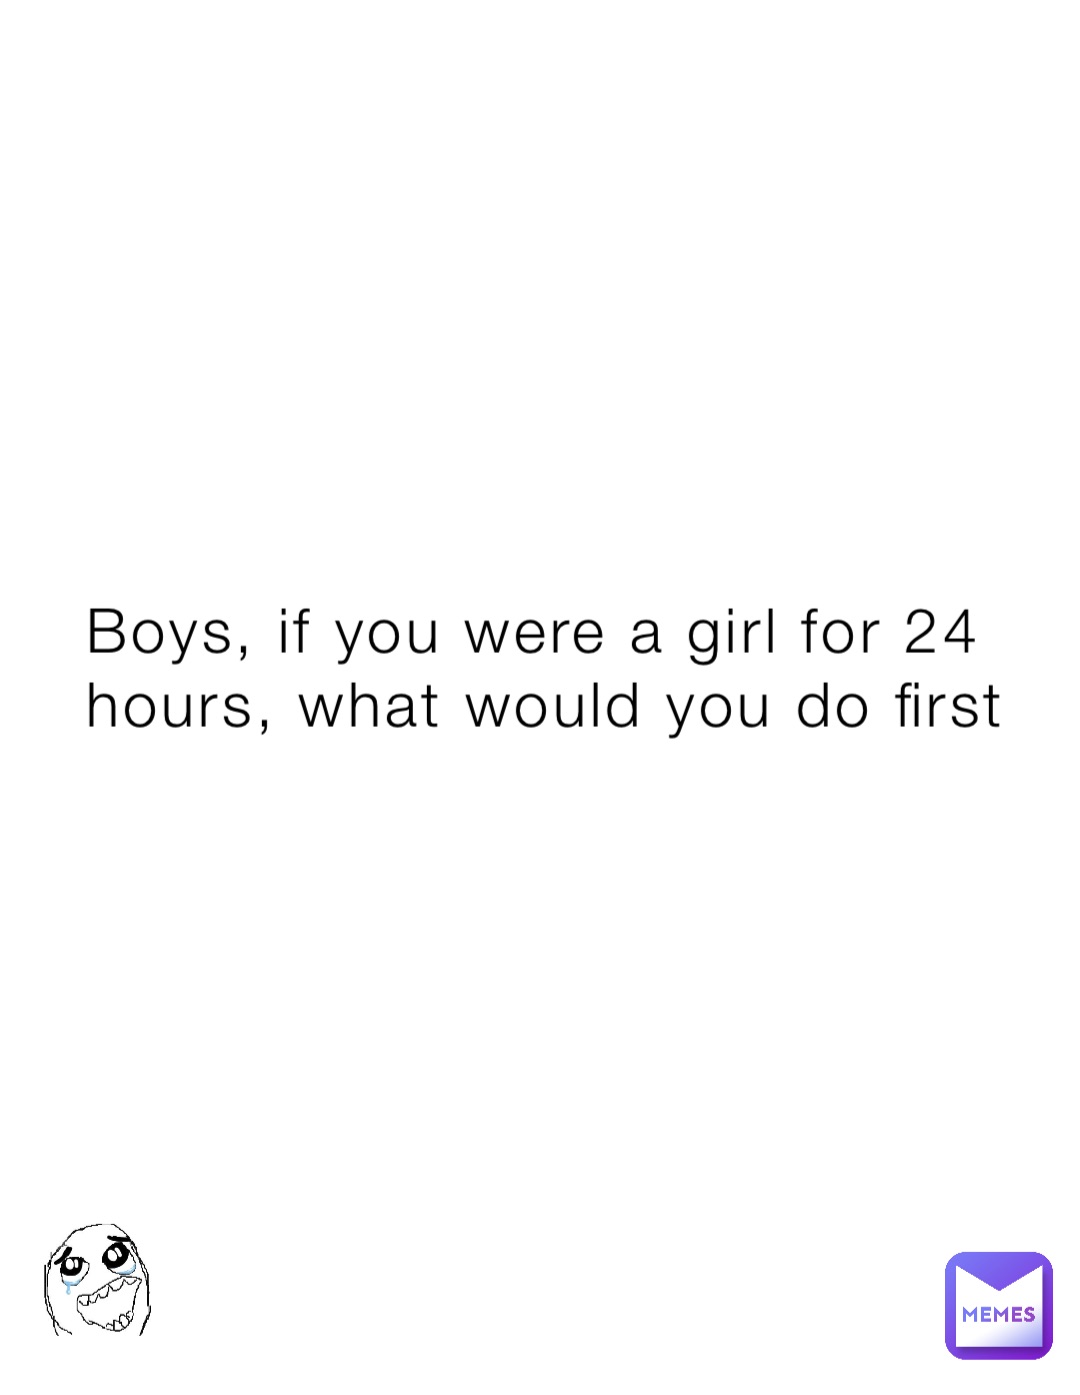 Boys, if you were a girl for 24 hours, what would you do first